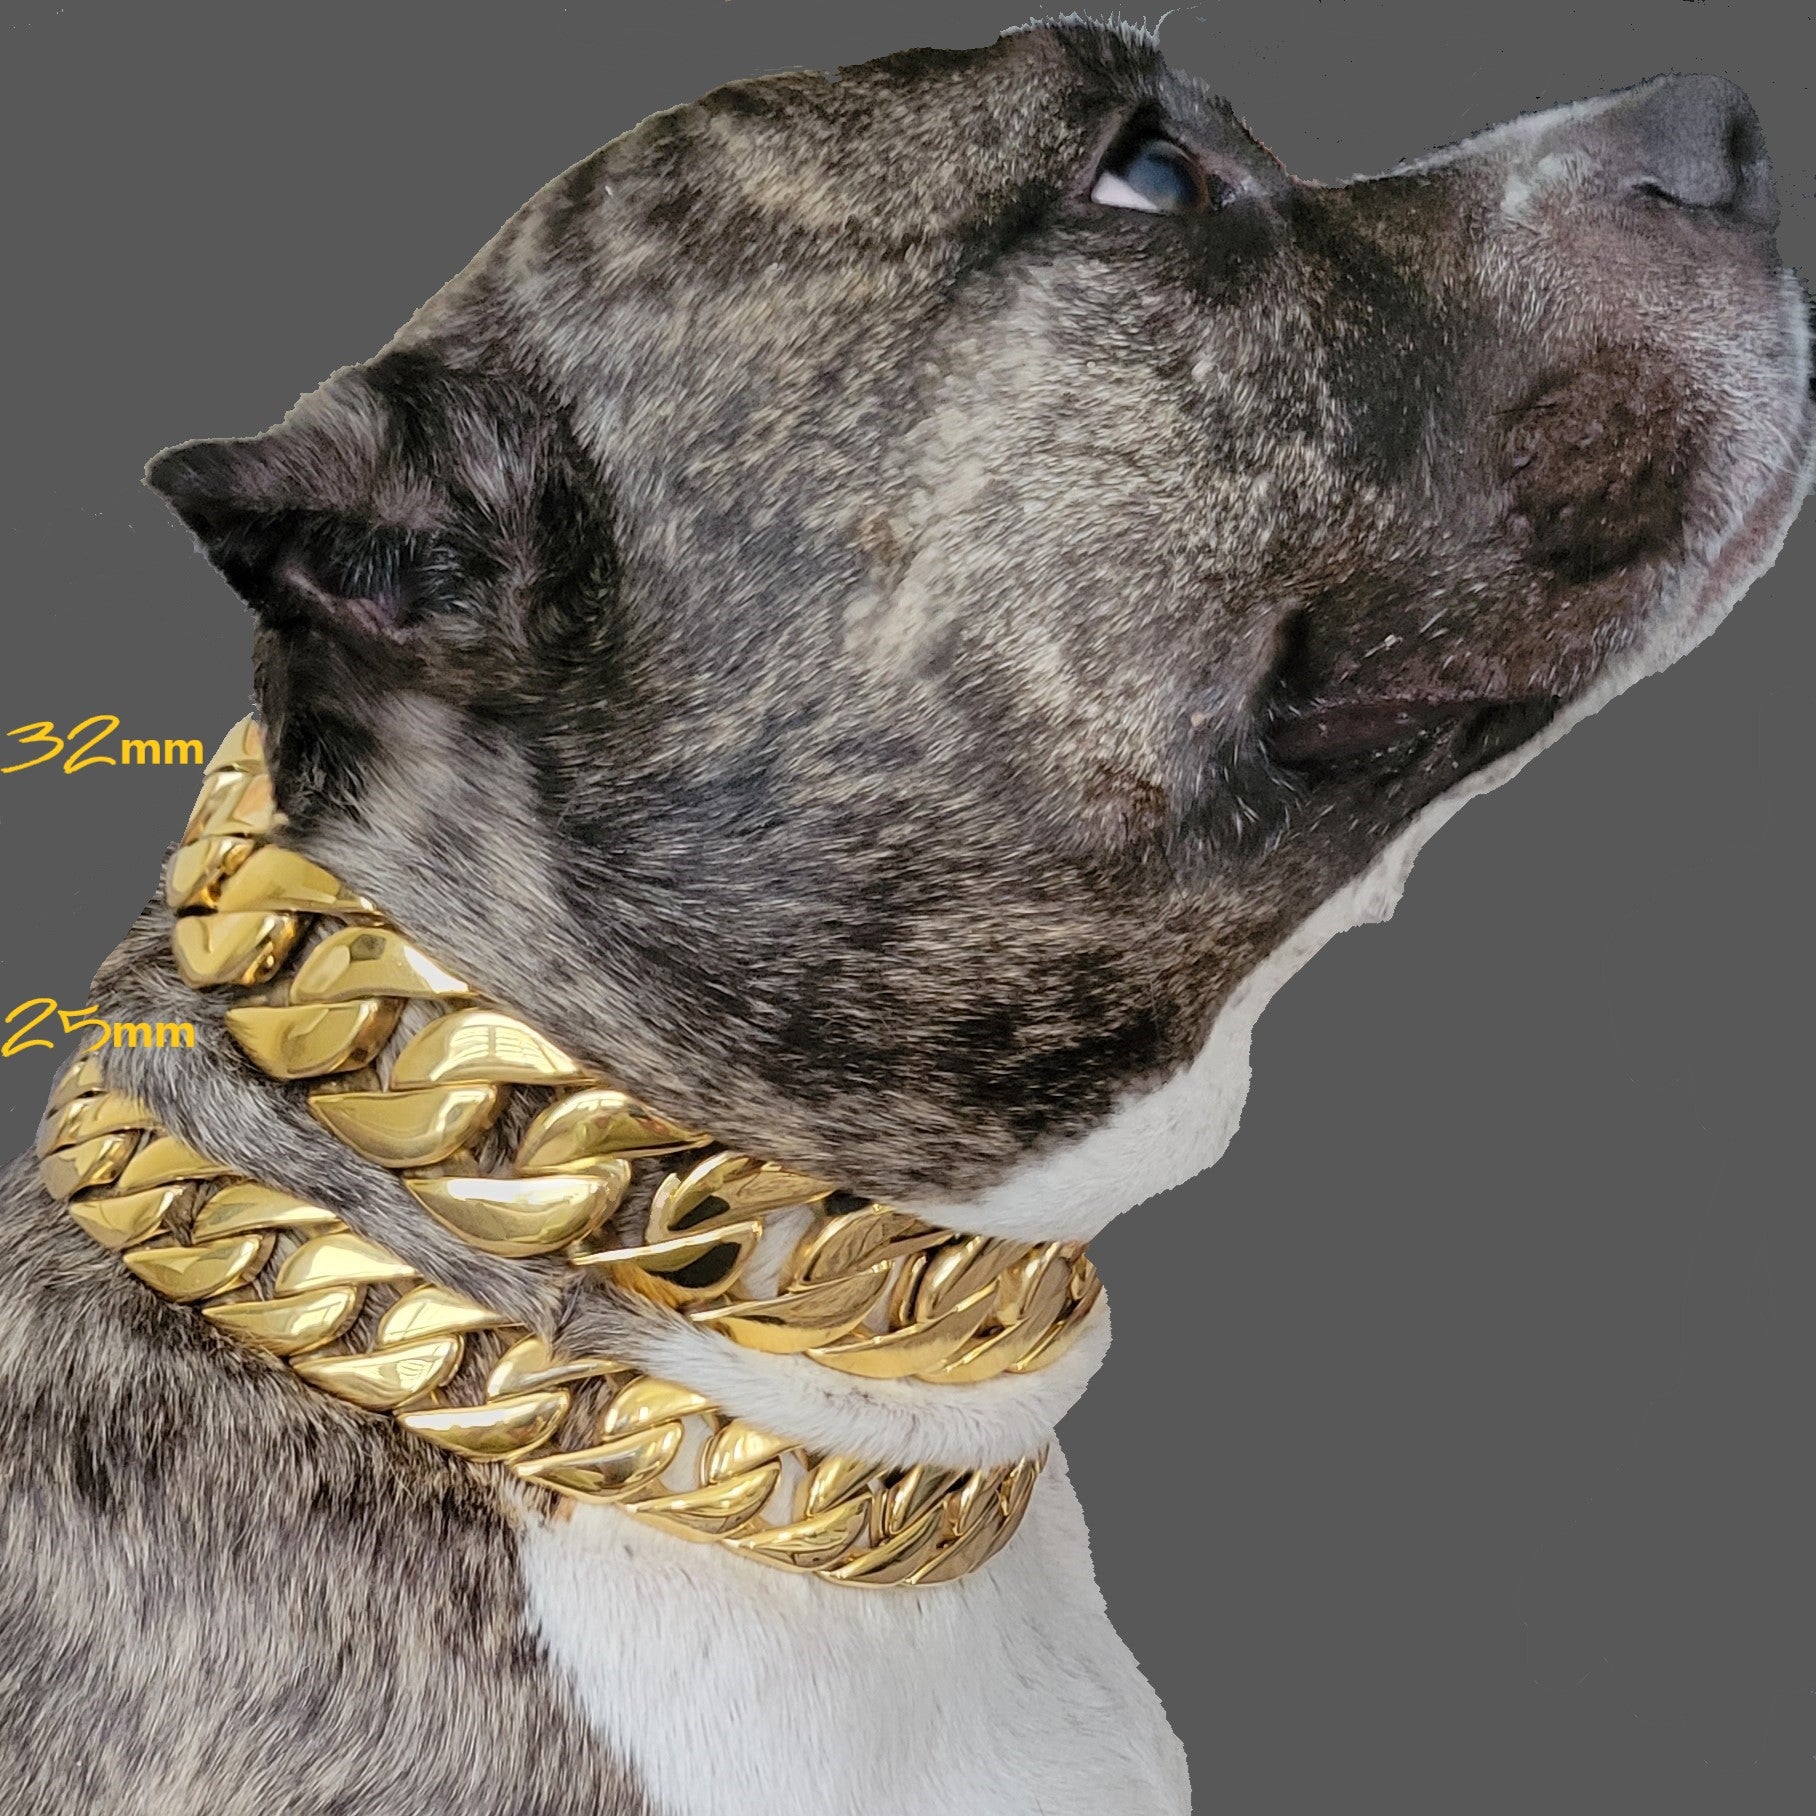 Gold Chain Dog Collar 16mm 18K Gold Cuban Link Dog Collar with Secure Snap Buckle Gold Dog Chain Metal Collar for Small Pitbull (16mm, 22)